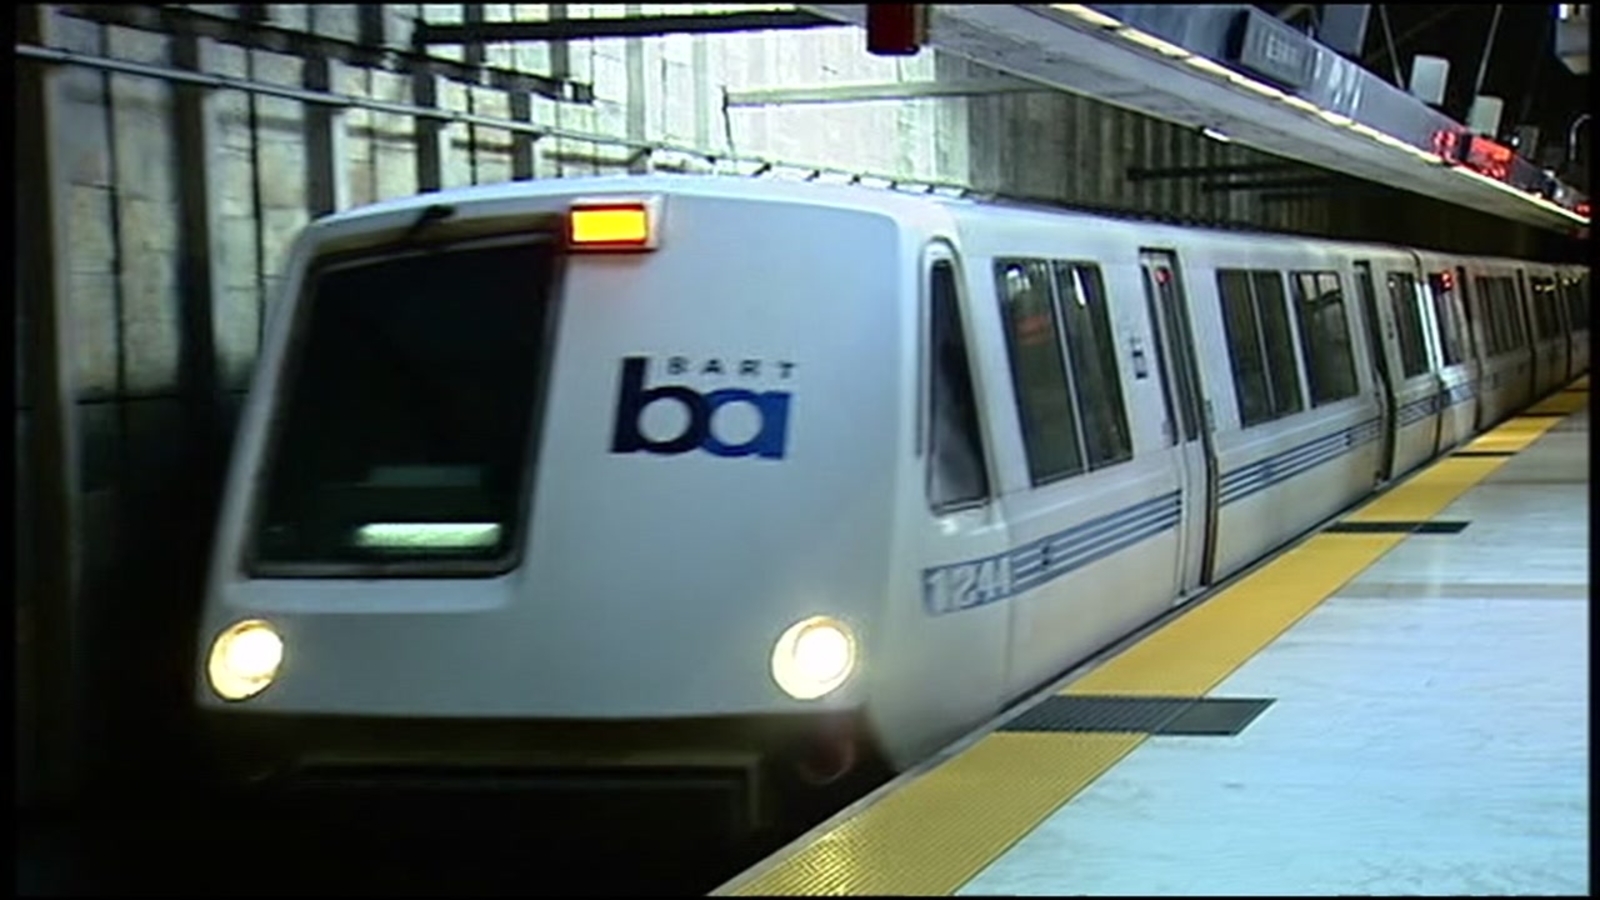 East Bay BART service suspended on Red Line due to equipment problem, officials say [Video]